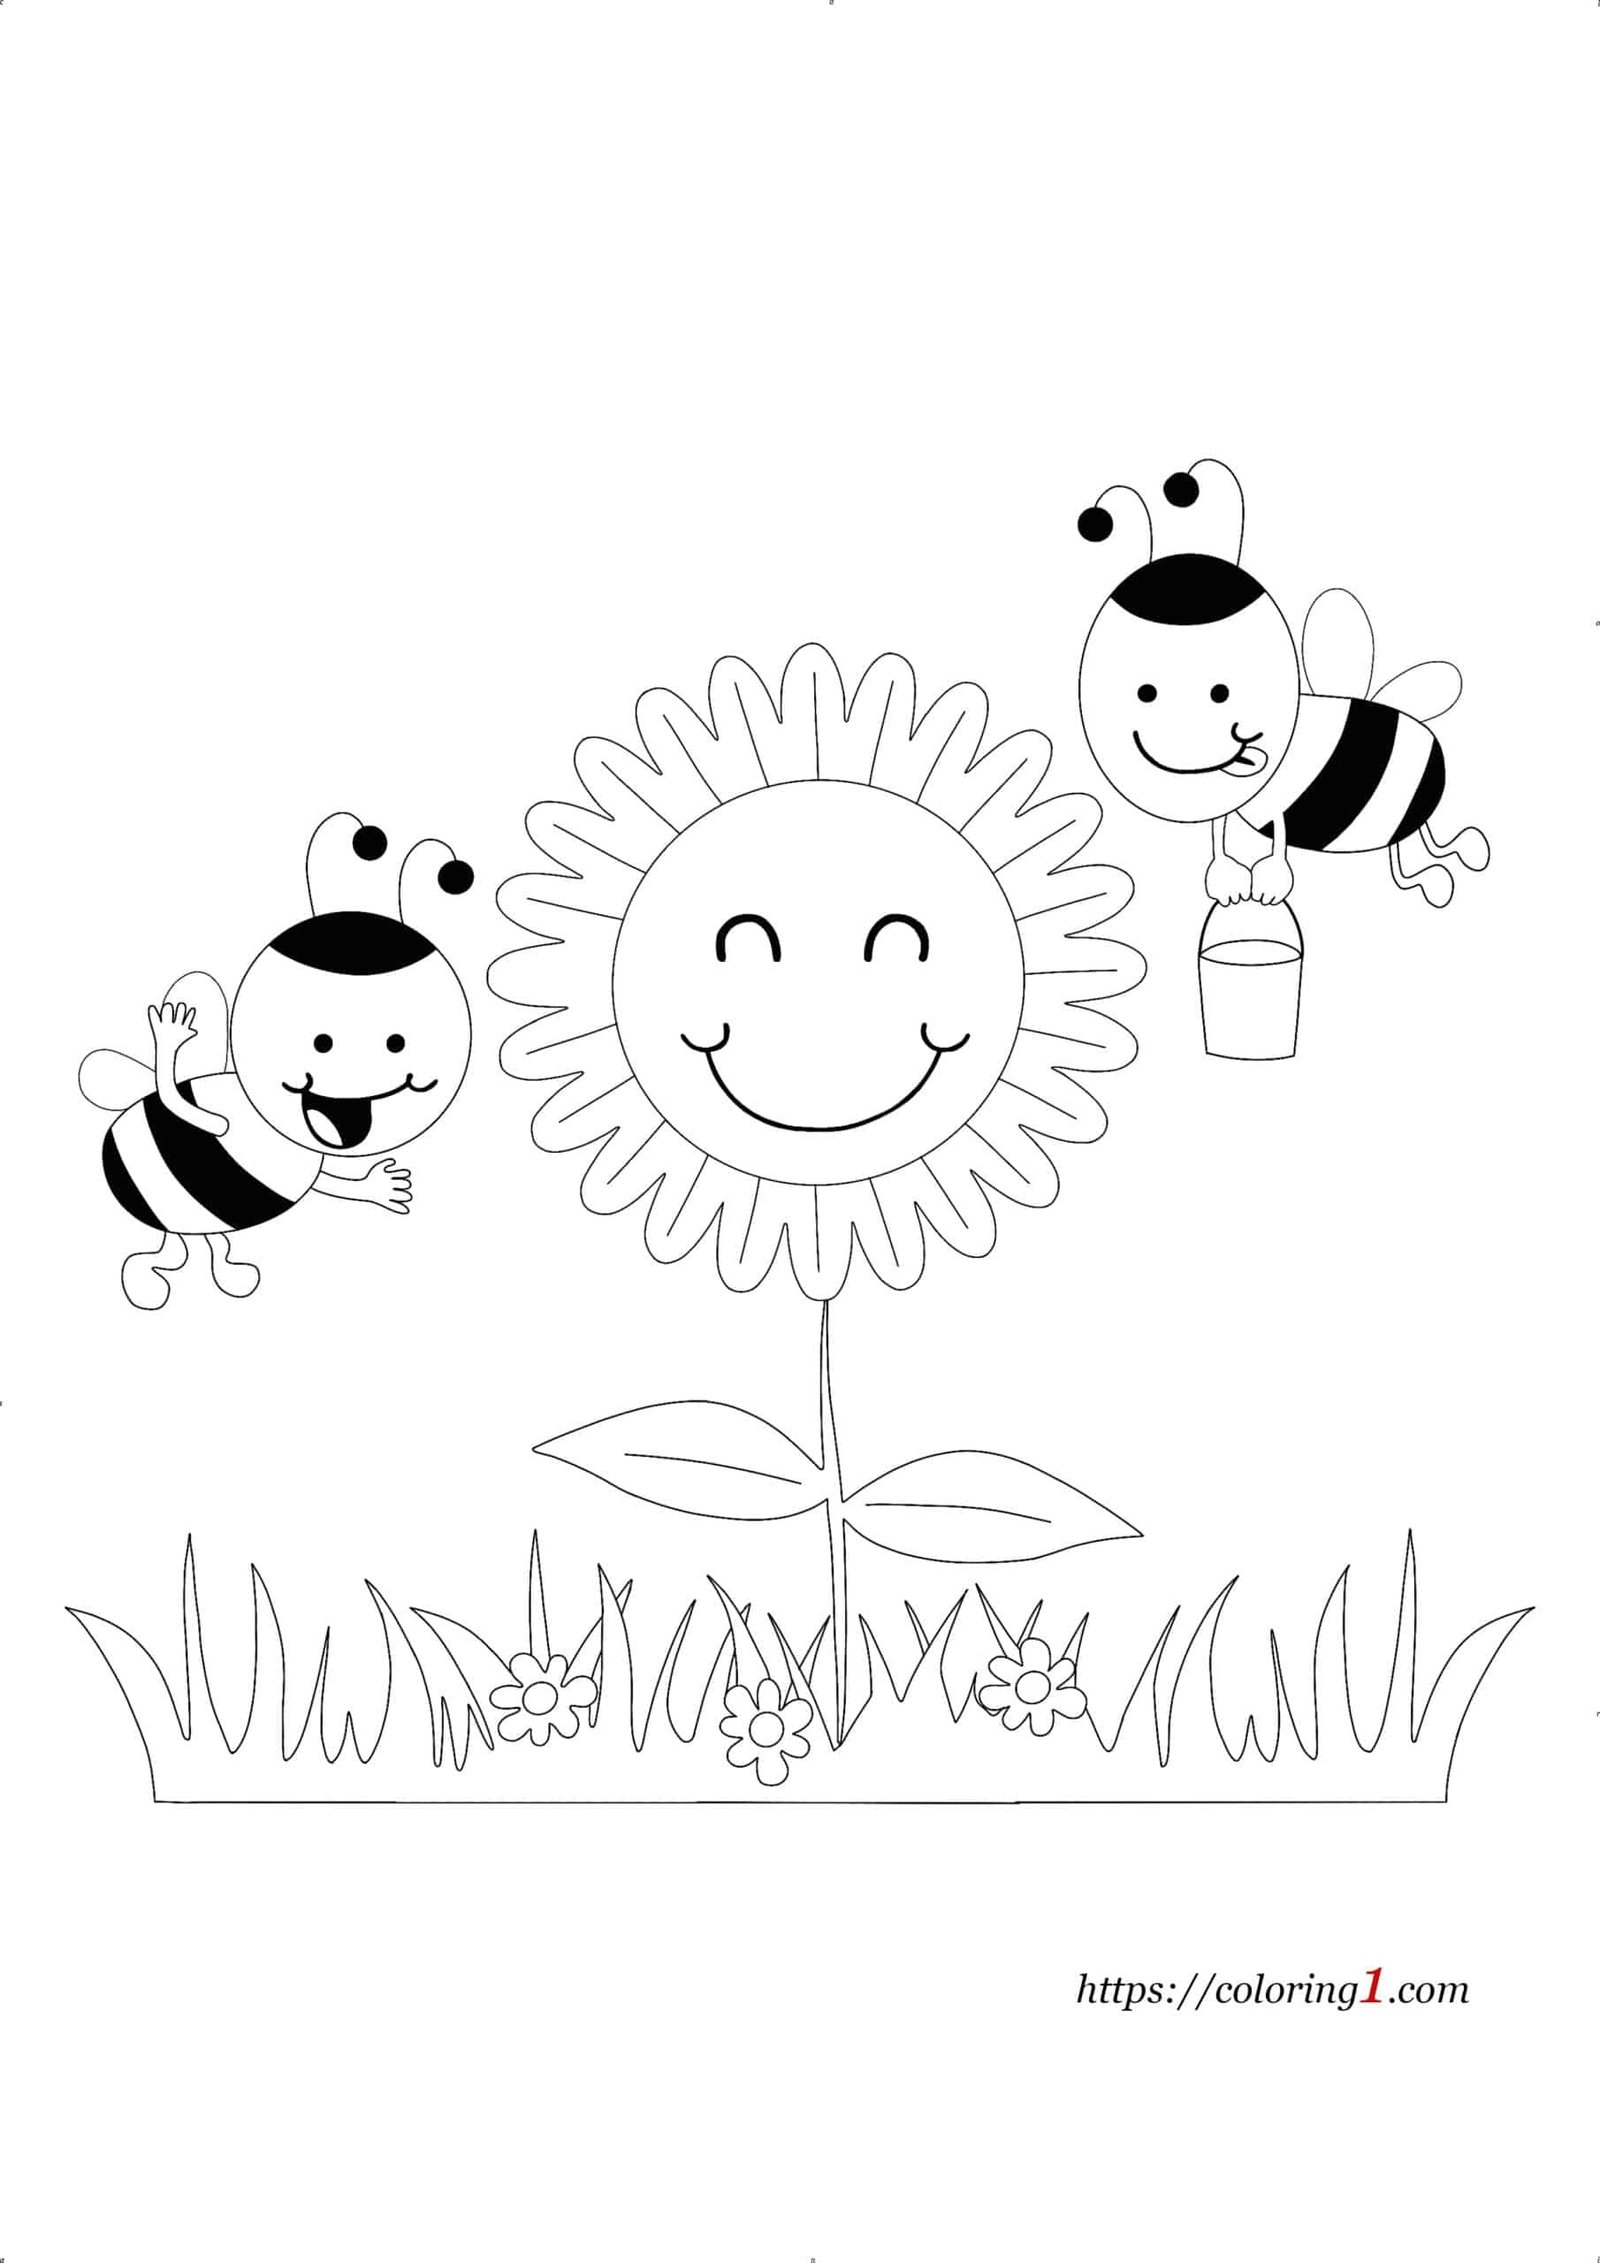 Two Bees and Big Flower coloring page